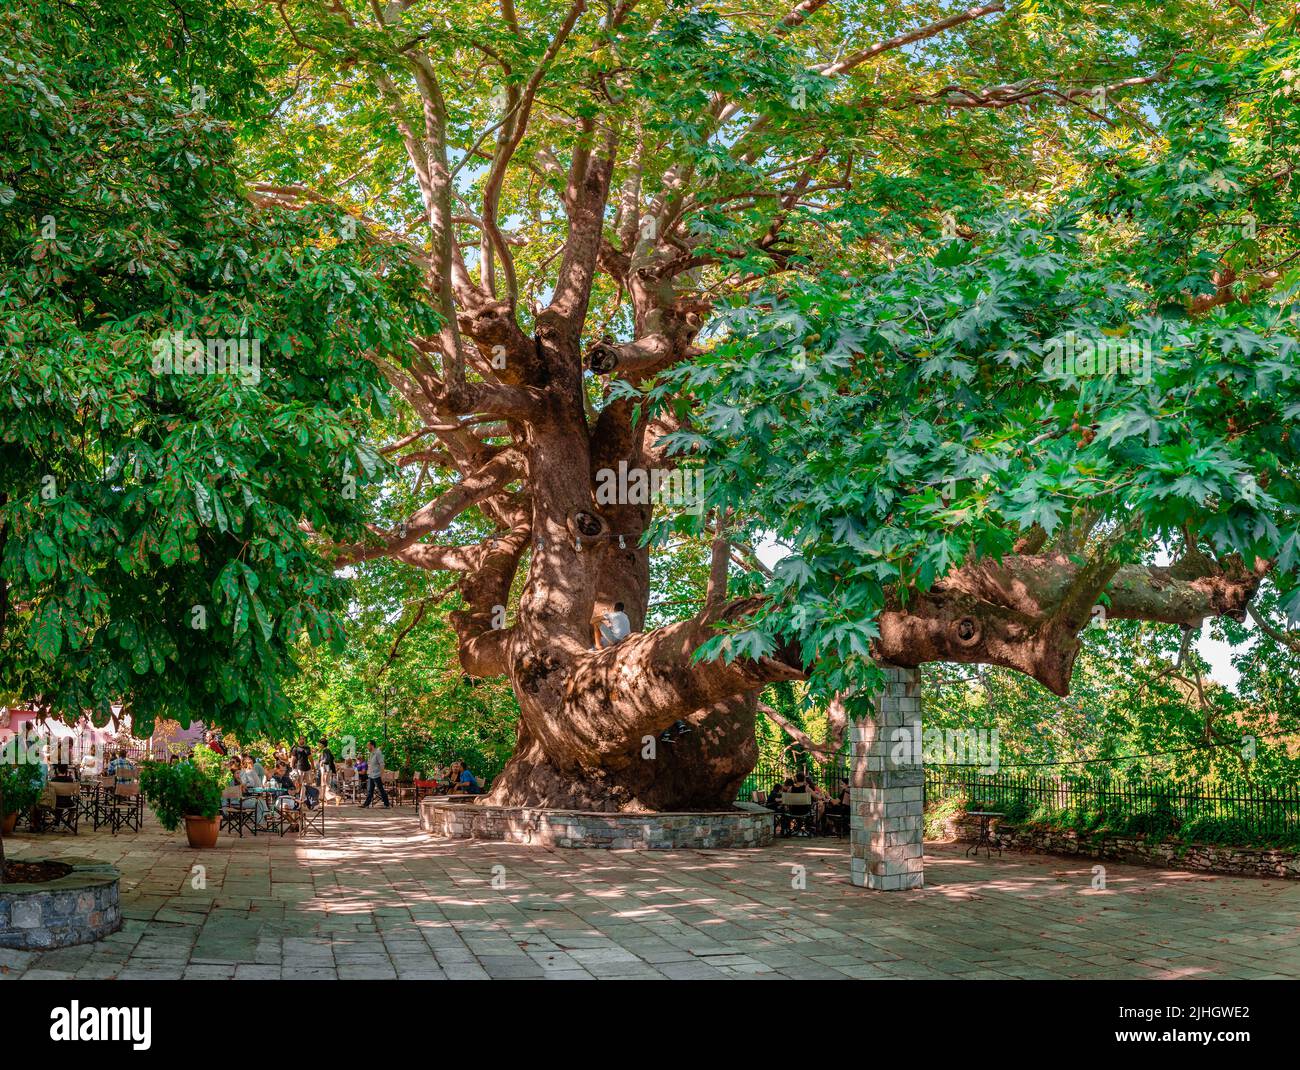 Tsagarada, Greece - August 17 2020: The magnificent perennial 1000 years old plane tree in Agia Paraskevi Square. Stock Photo